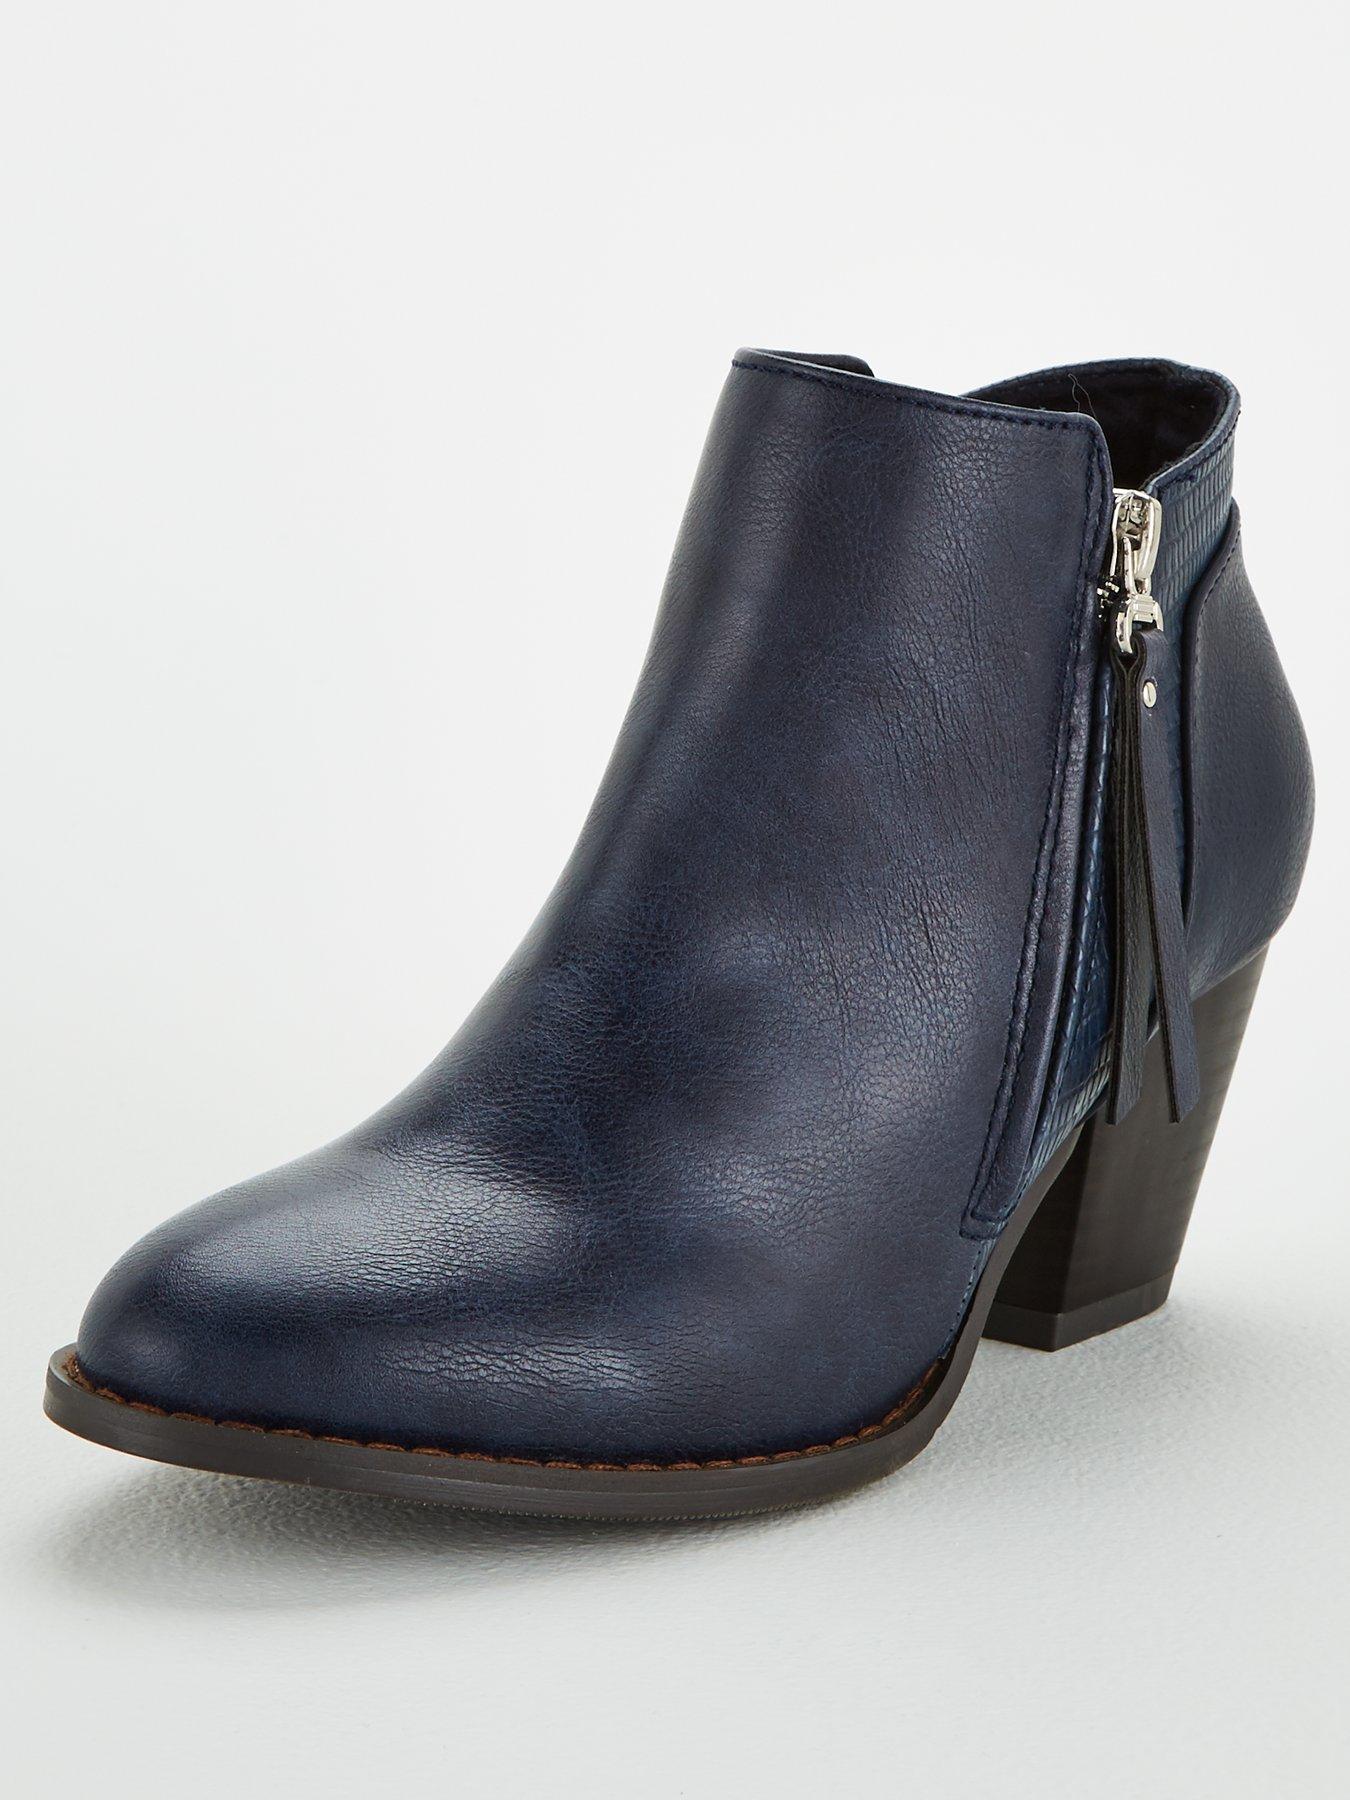 navy ankle boots uk